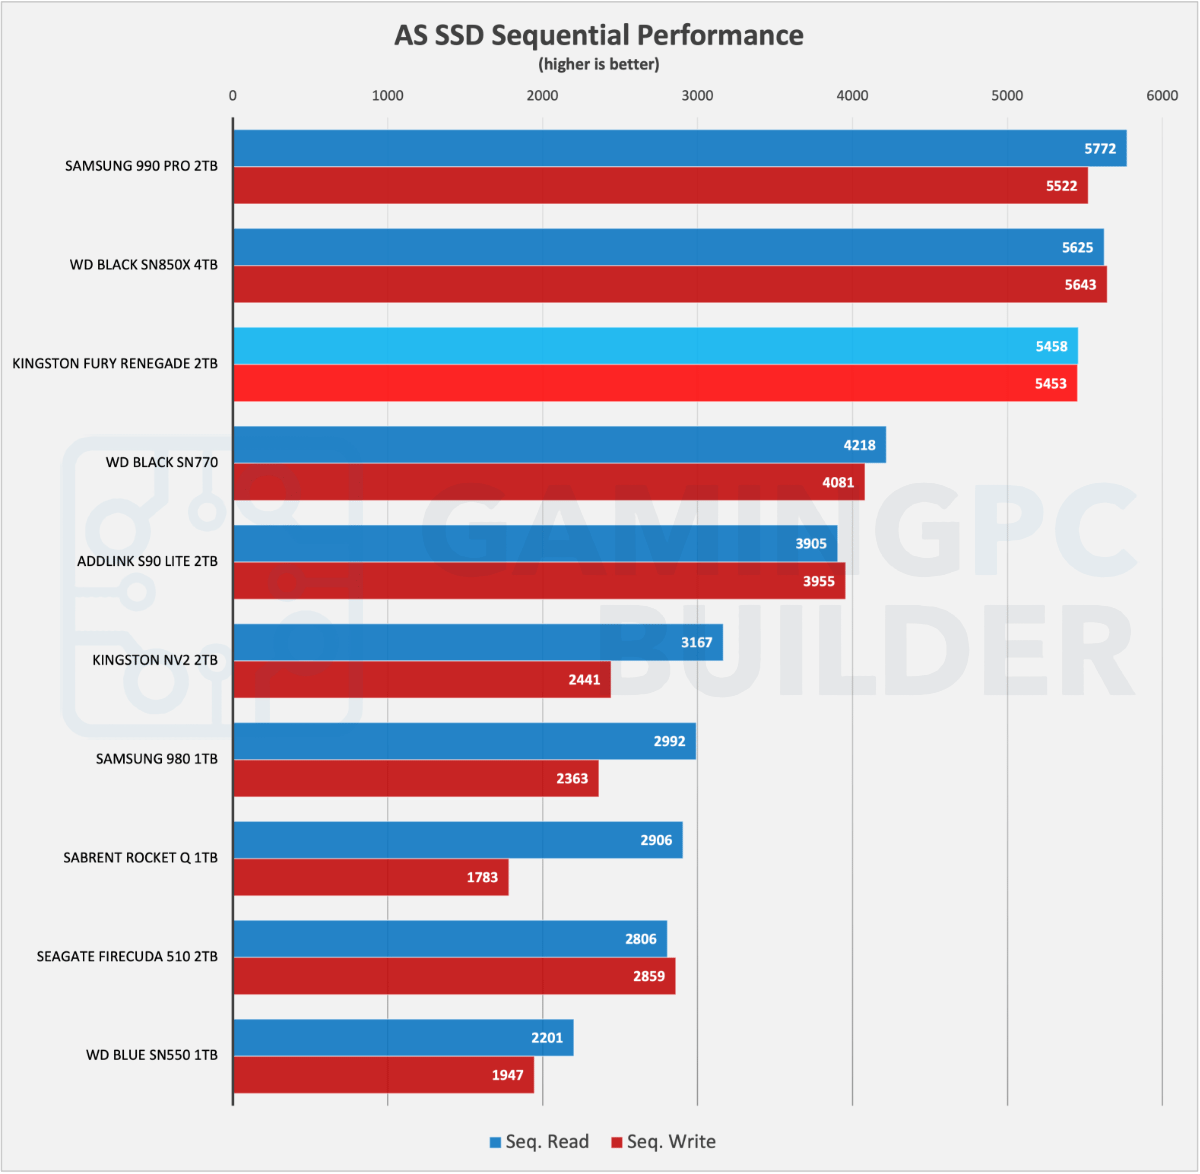 AS SSD sequential performance chart - Fury Renegade 2TB